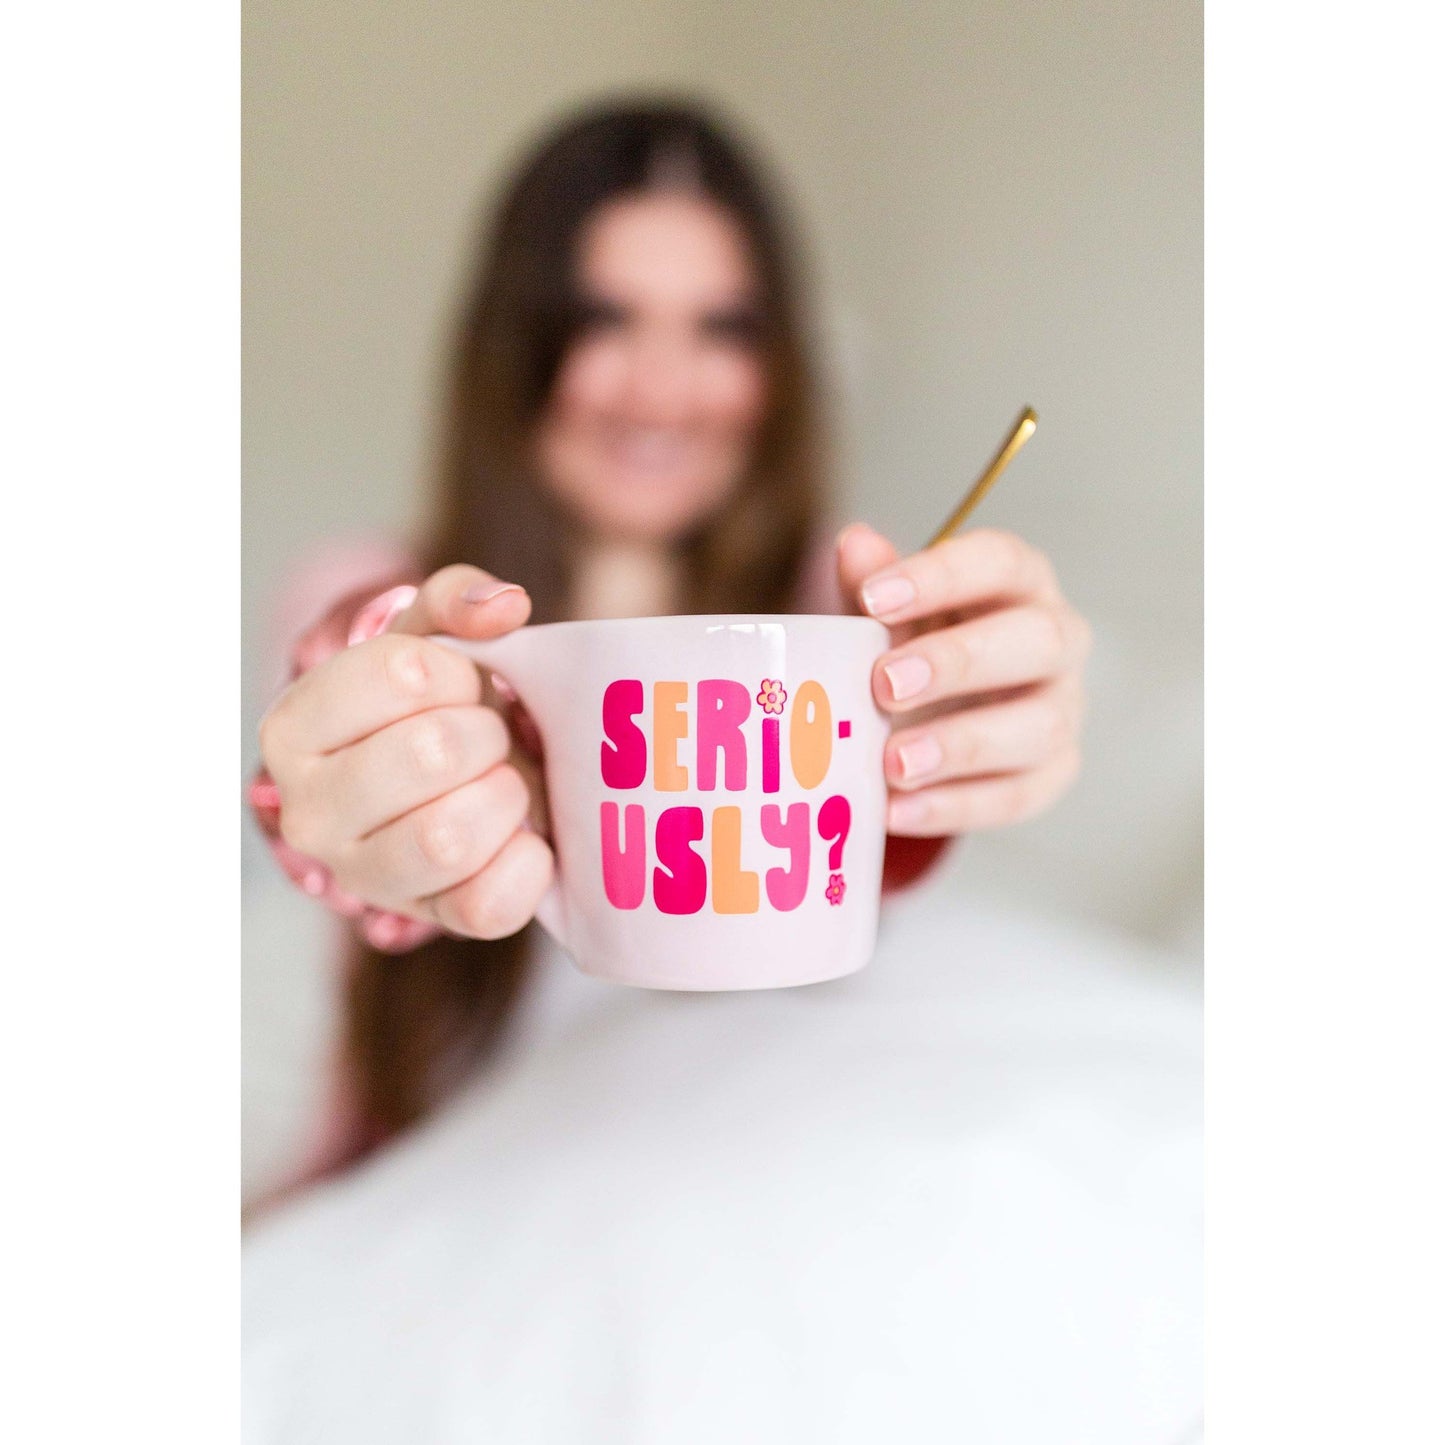 I Washed My Hair For This Element Mugs | Retro Coffee Cup in Pink